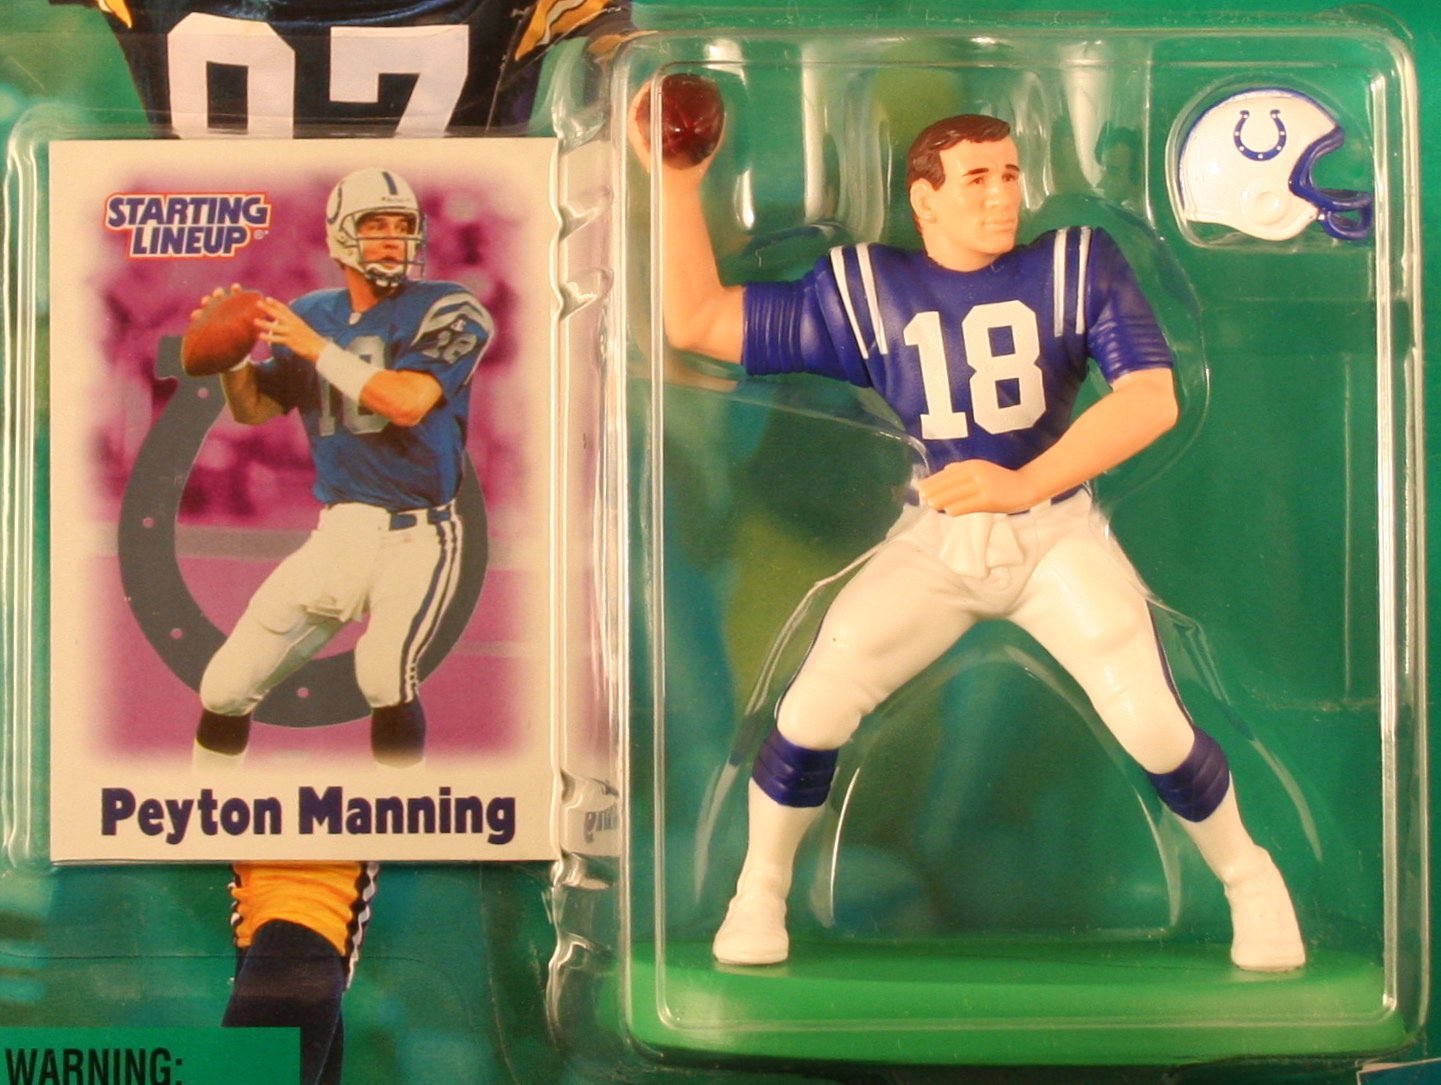 PEYTON MANNING / INDIANAPOLIS COLTS 2000-2001 NFL Starting Lineup Action Figure & Exclusive NFL Collector Trading Card